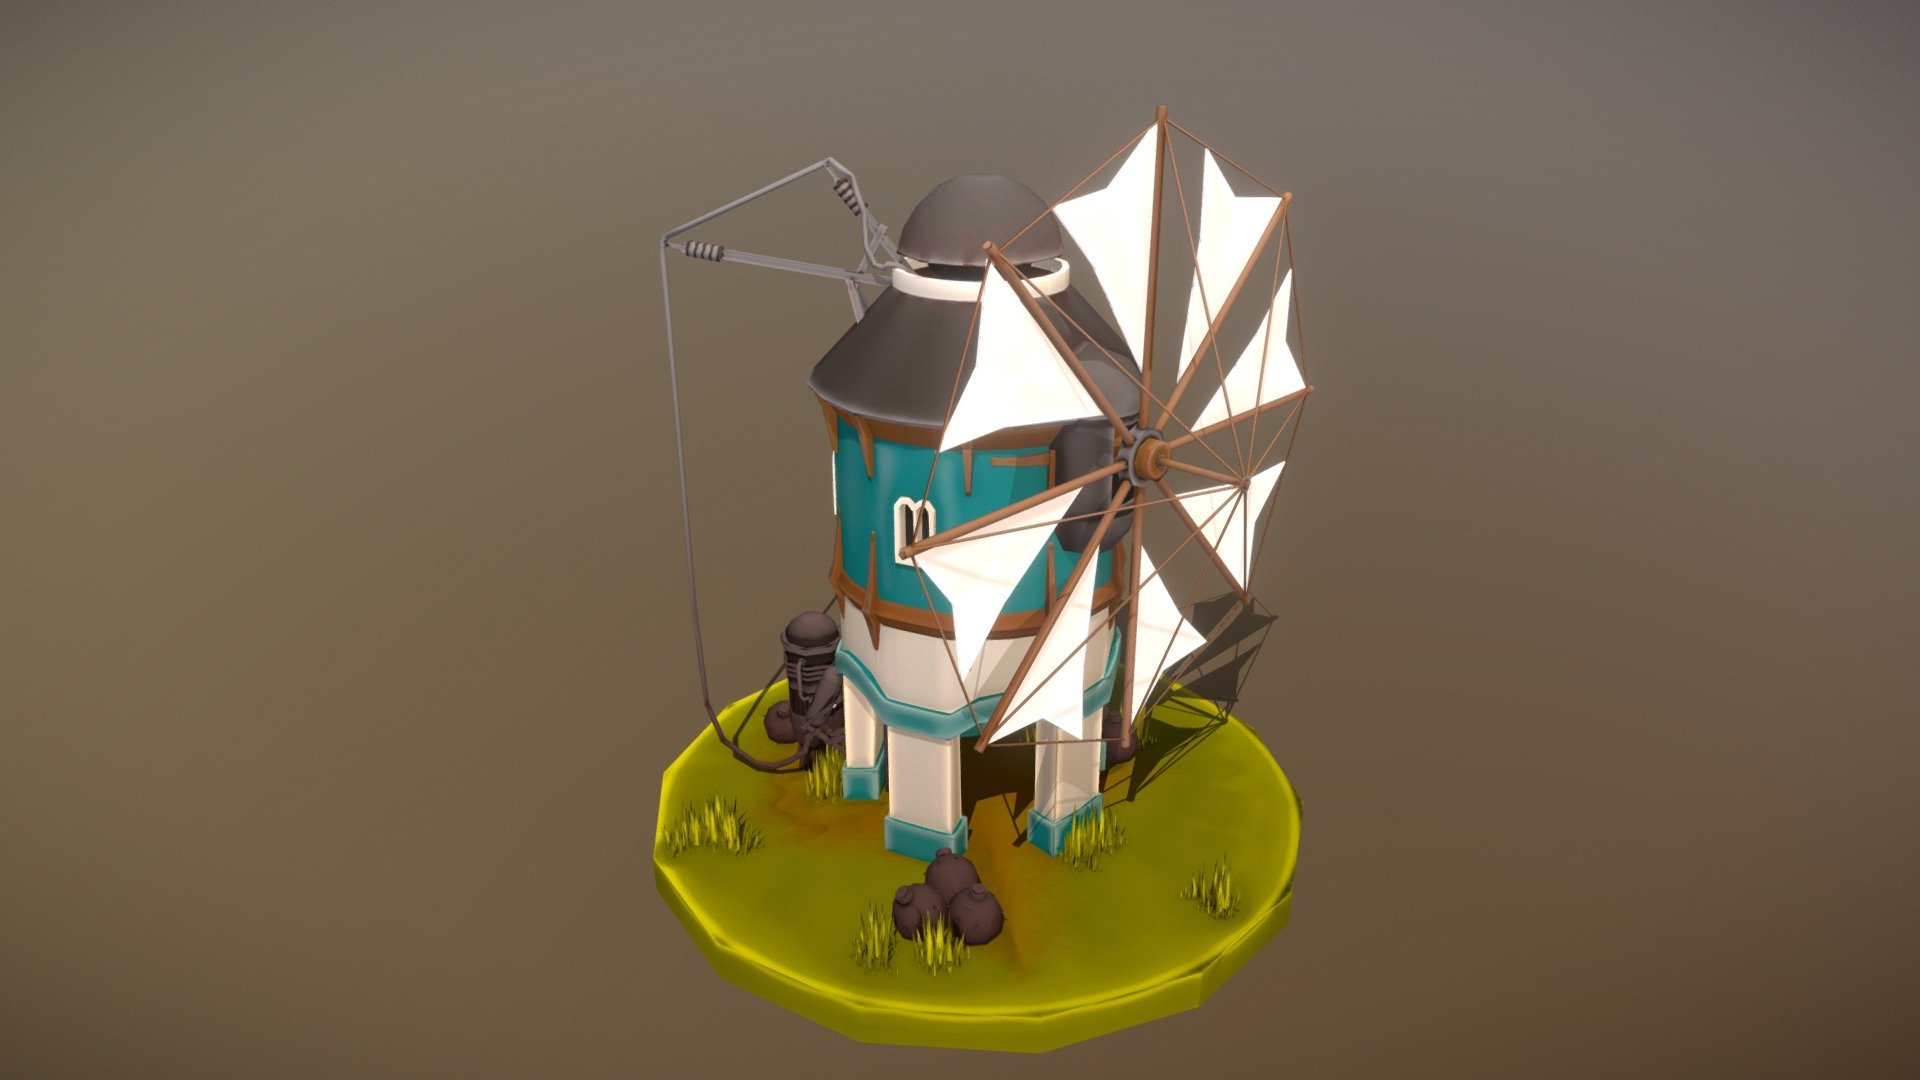 A windmill inspired by Roman/Greek architecture and a bit of Star Wars.

The ground, grass and the round propane tanks are just decorative. The windmill model is for the RTS-game. 

Any feedback is welcome and appreciated! - RTS-game windmill - 3D model by GlennValke (@GlennValkePro) 3d model